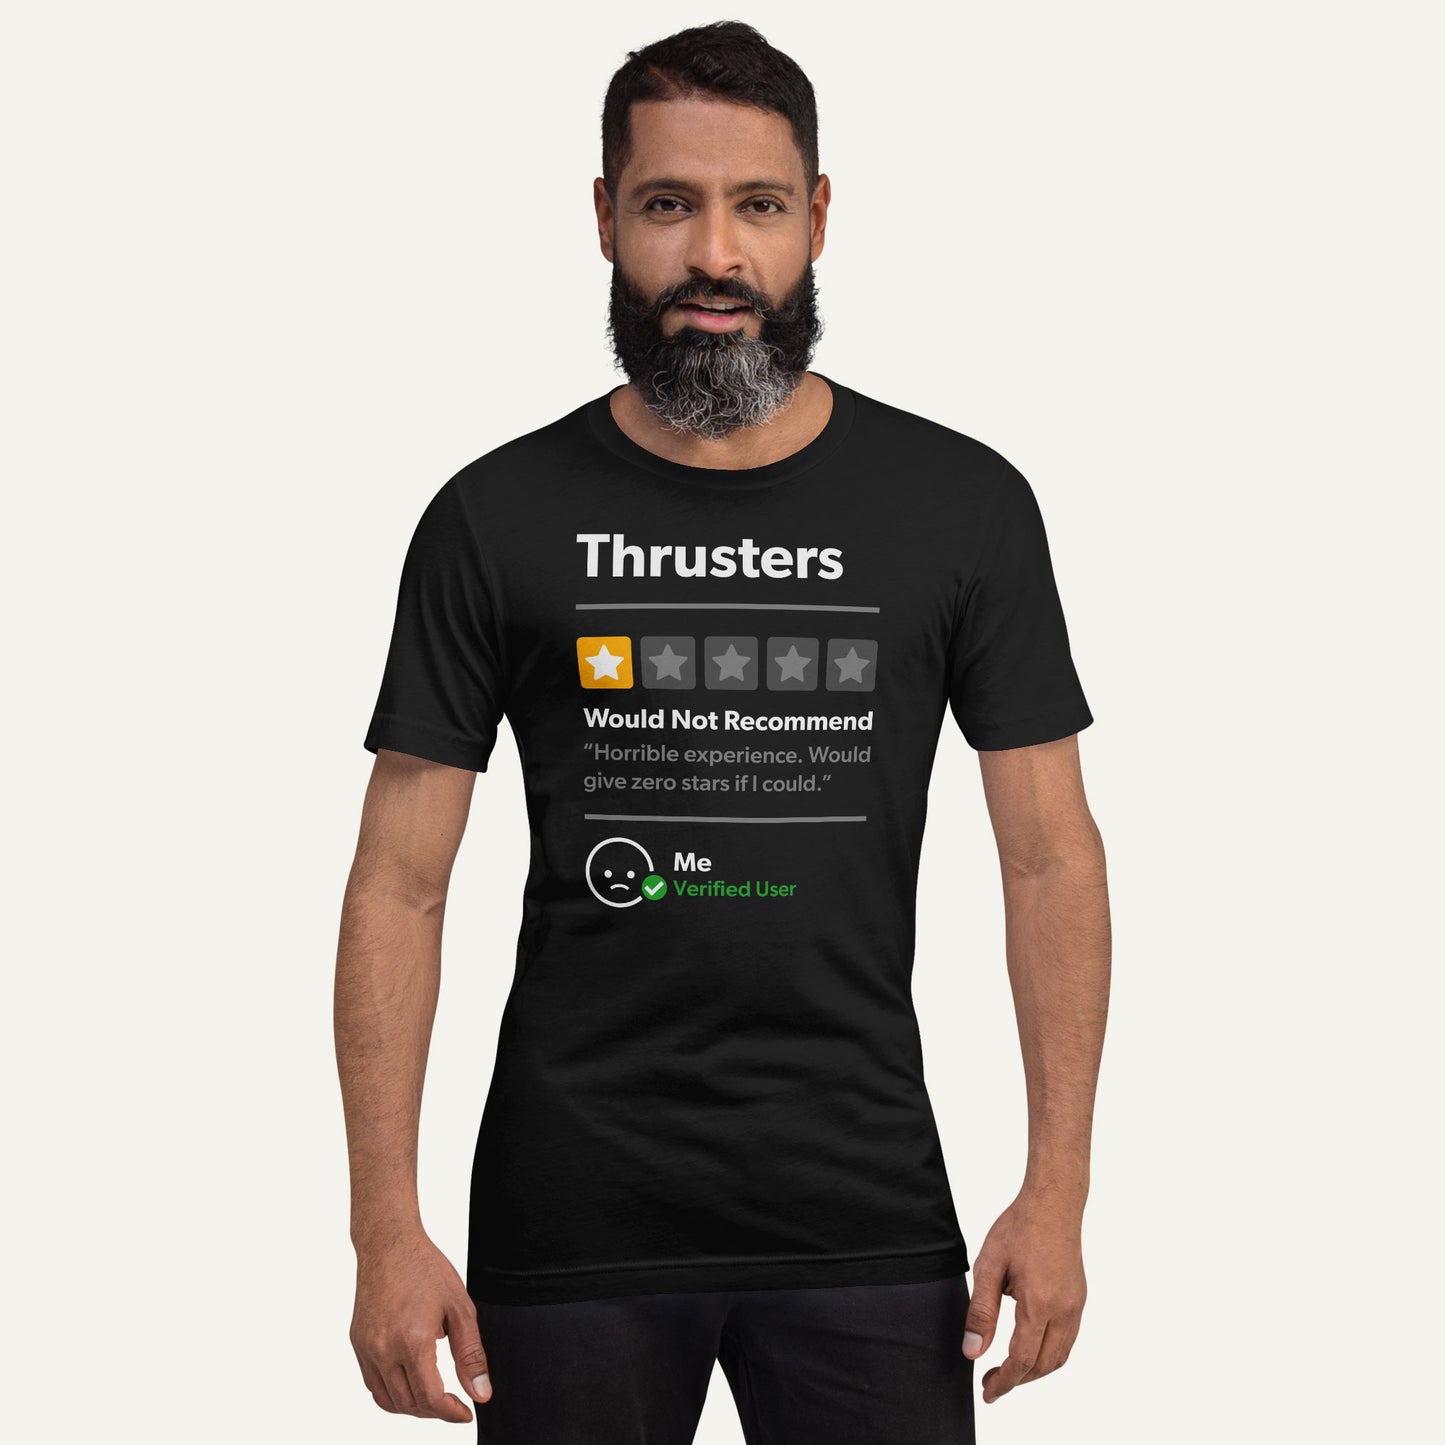 Thrusters 1 Star Would Not Recommend Men’s Standard T-Shirt